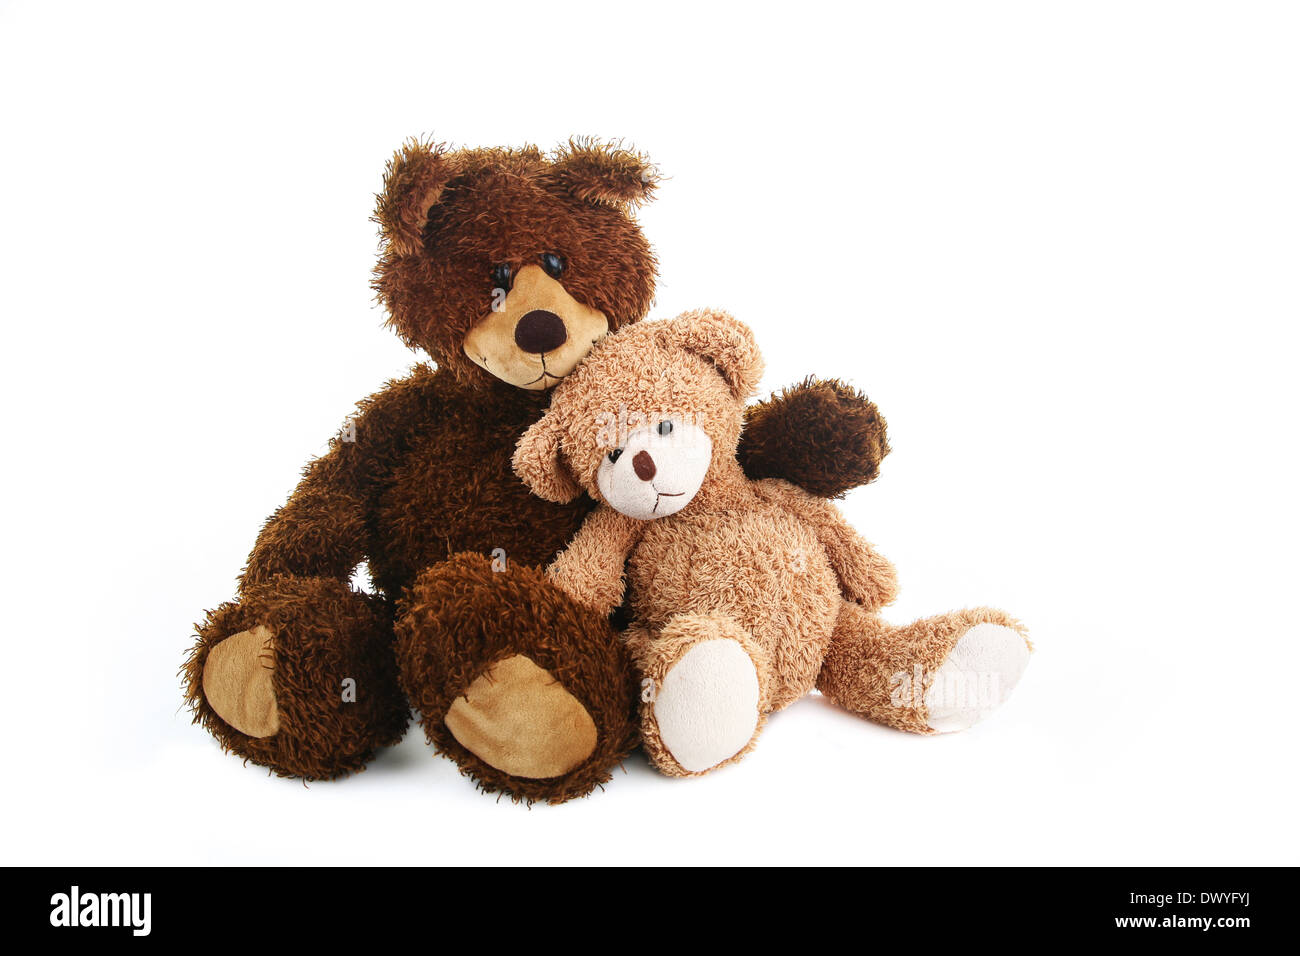 Two teddy bears, bigger and smaller, sitting close to each other like they are best friends. Stock Photo